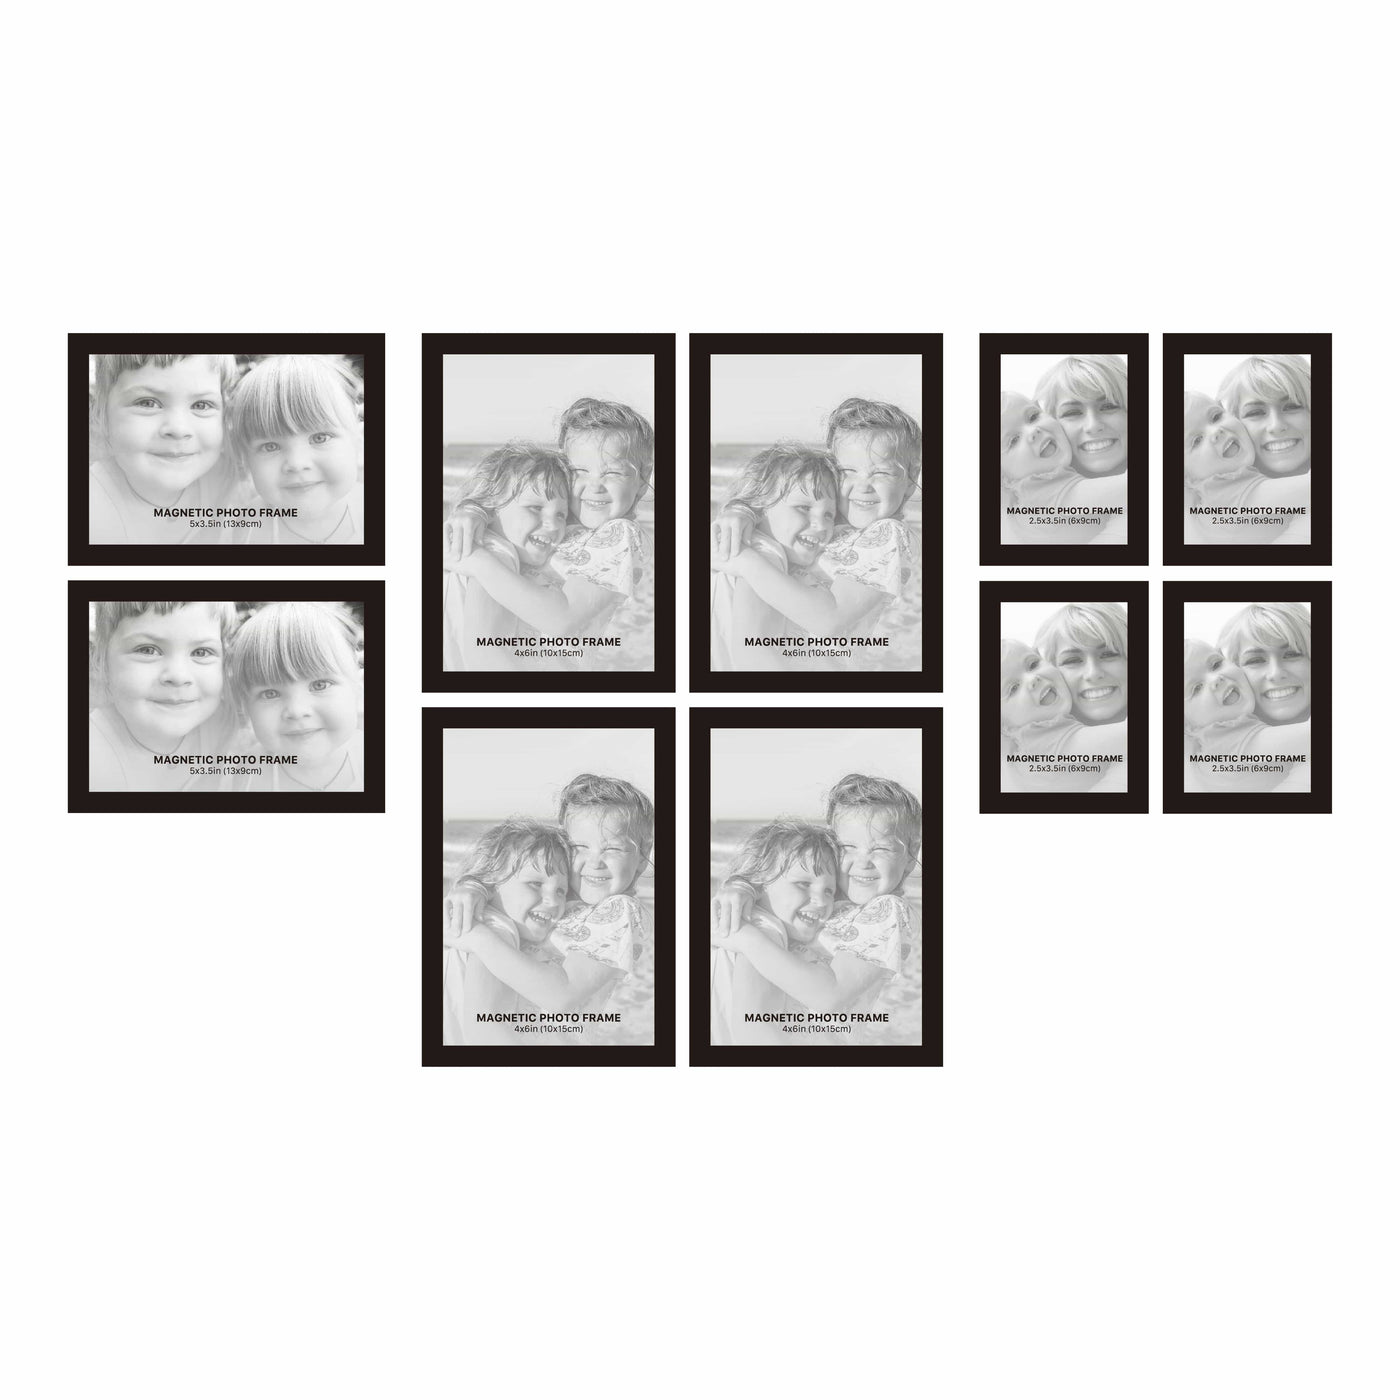 Magnetic Fridge Frames 10 Piece Photo Frames Set from our Acrylic & Novelty Frames collection by Profile Products Australia